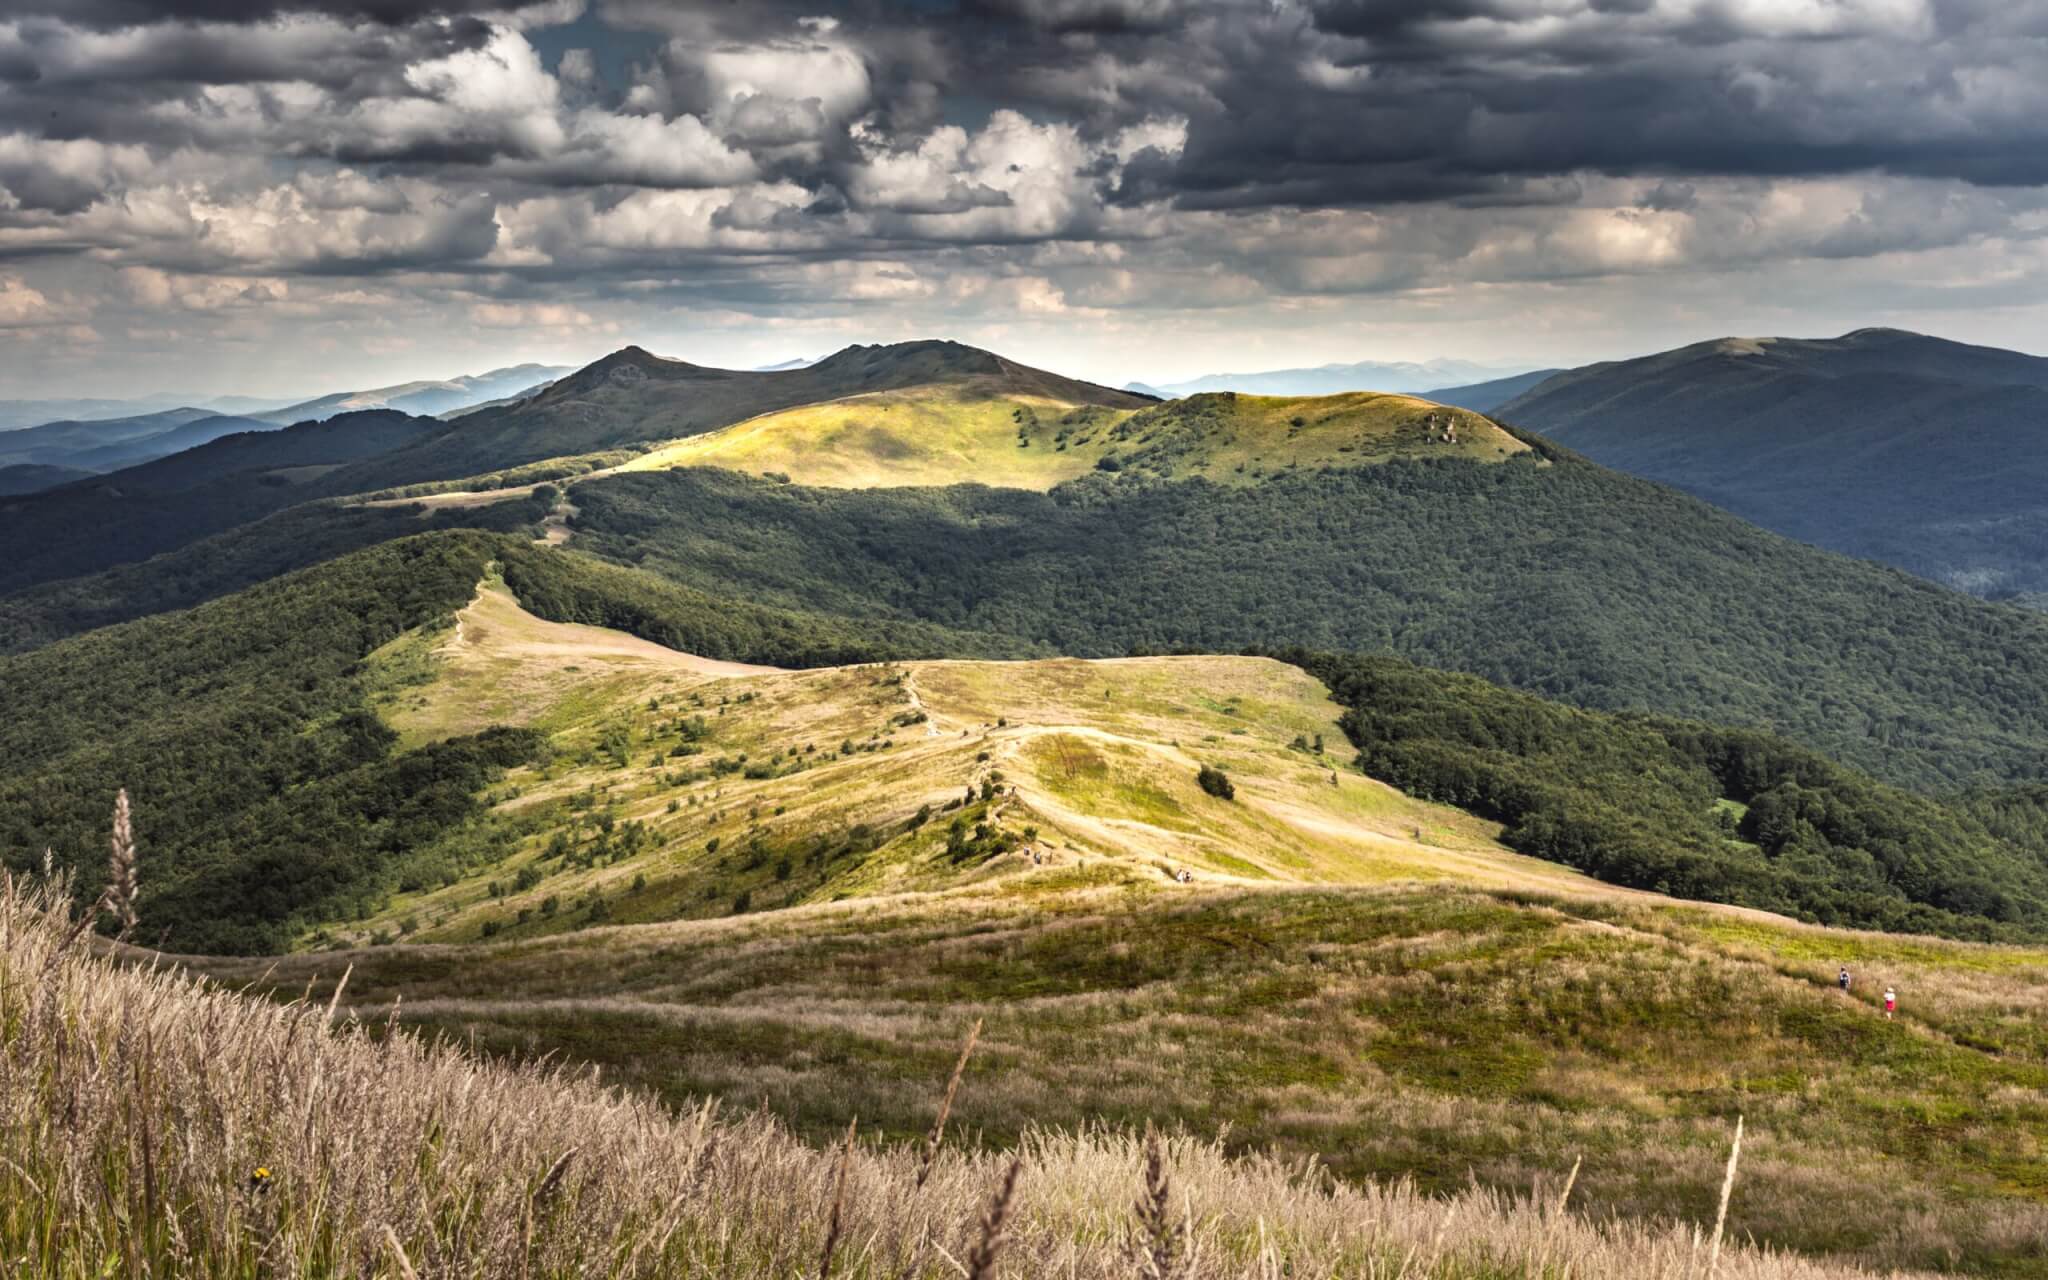 Bieszczady Mountains, in other words the Polish Western